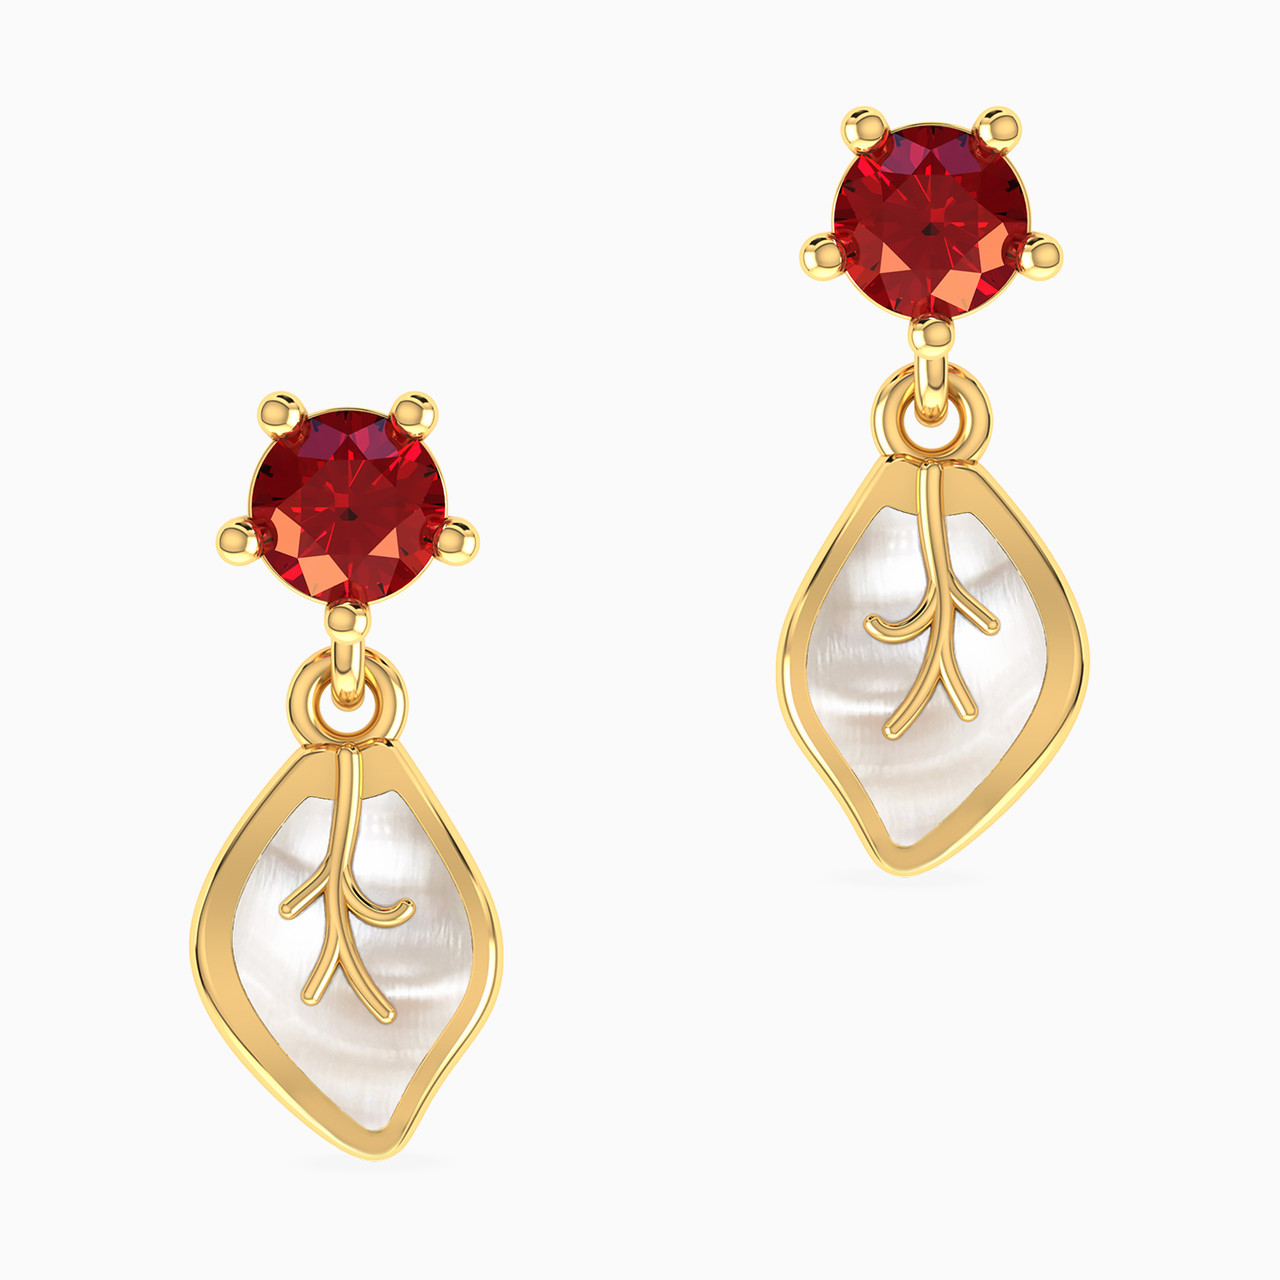 Leaf Shaped Colored Stones Drop Earrings in 18K Gold